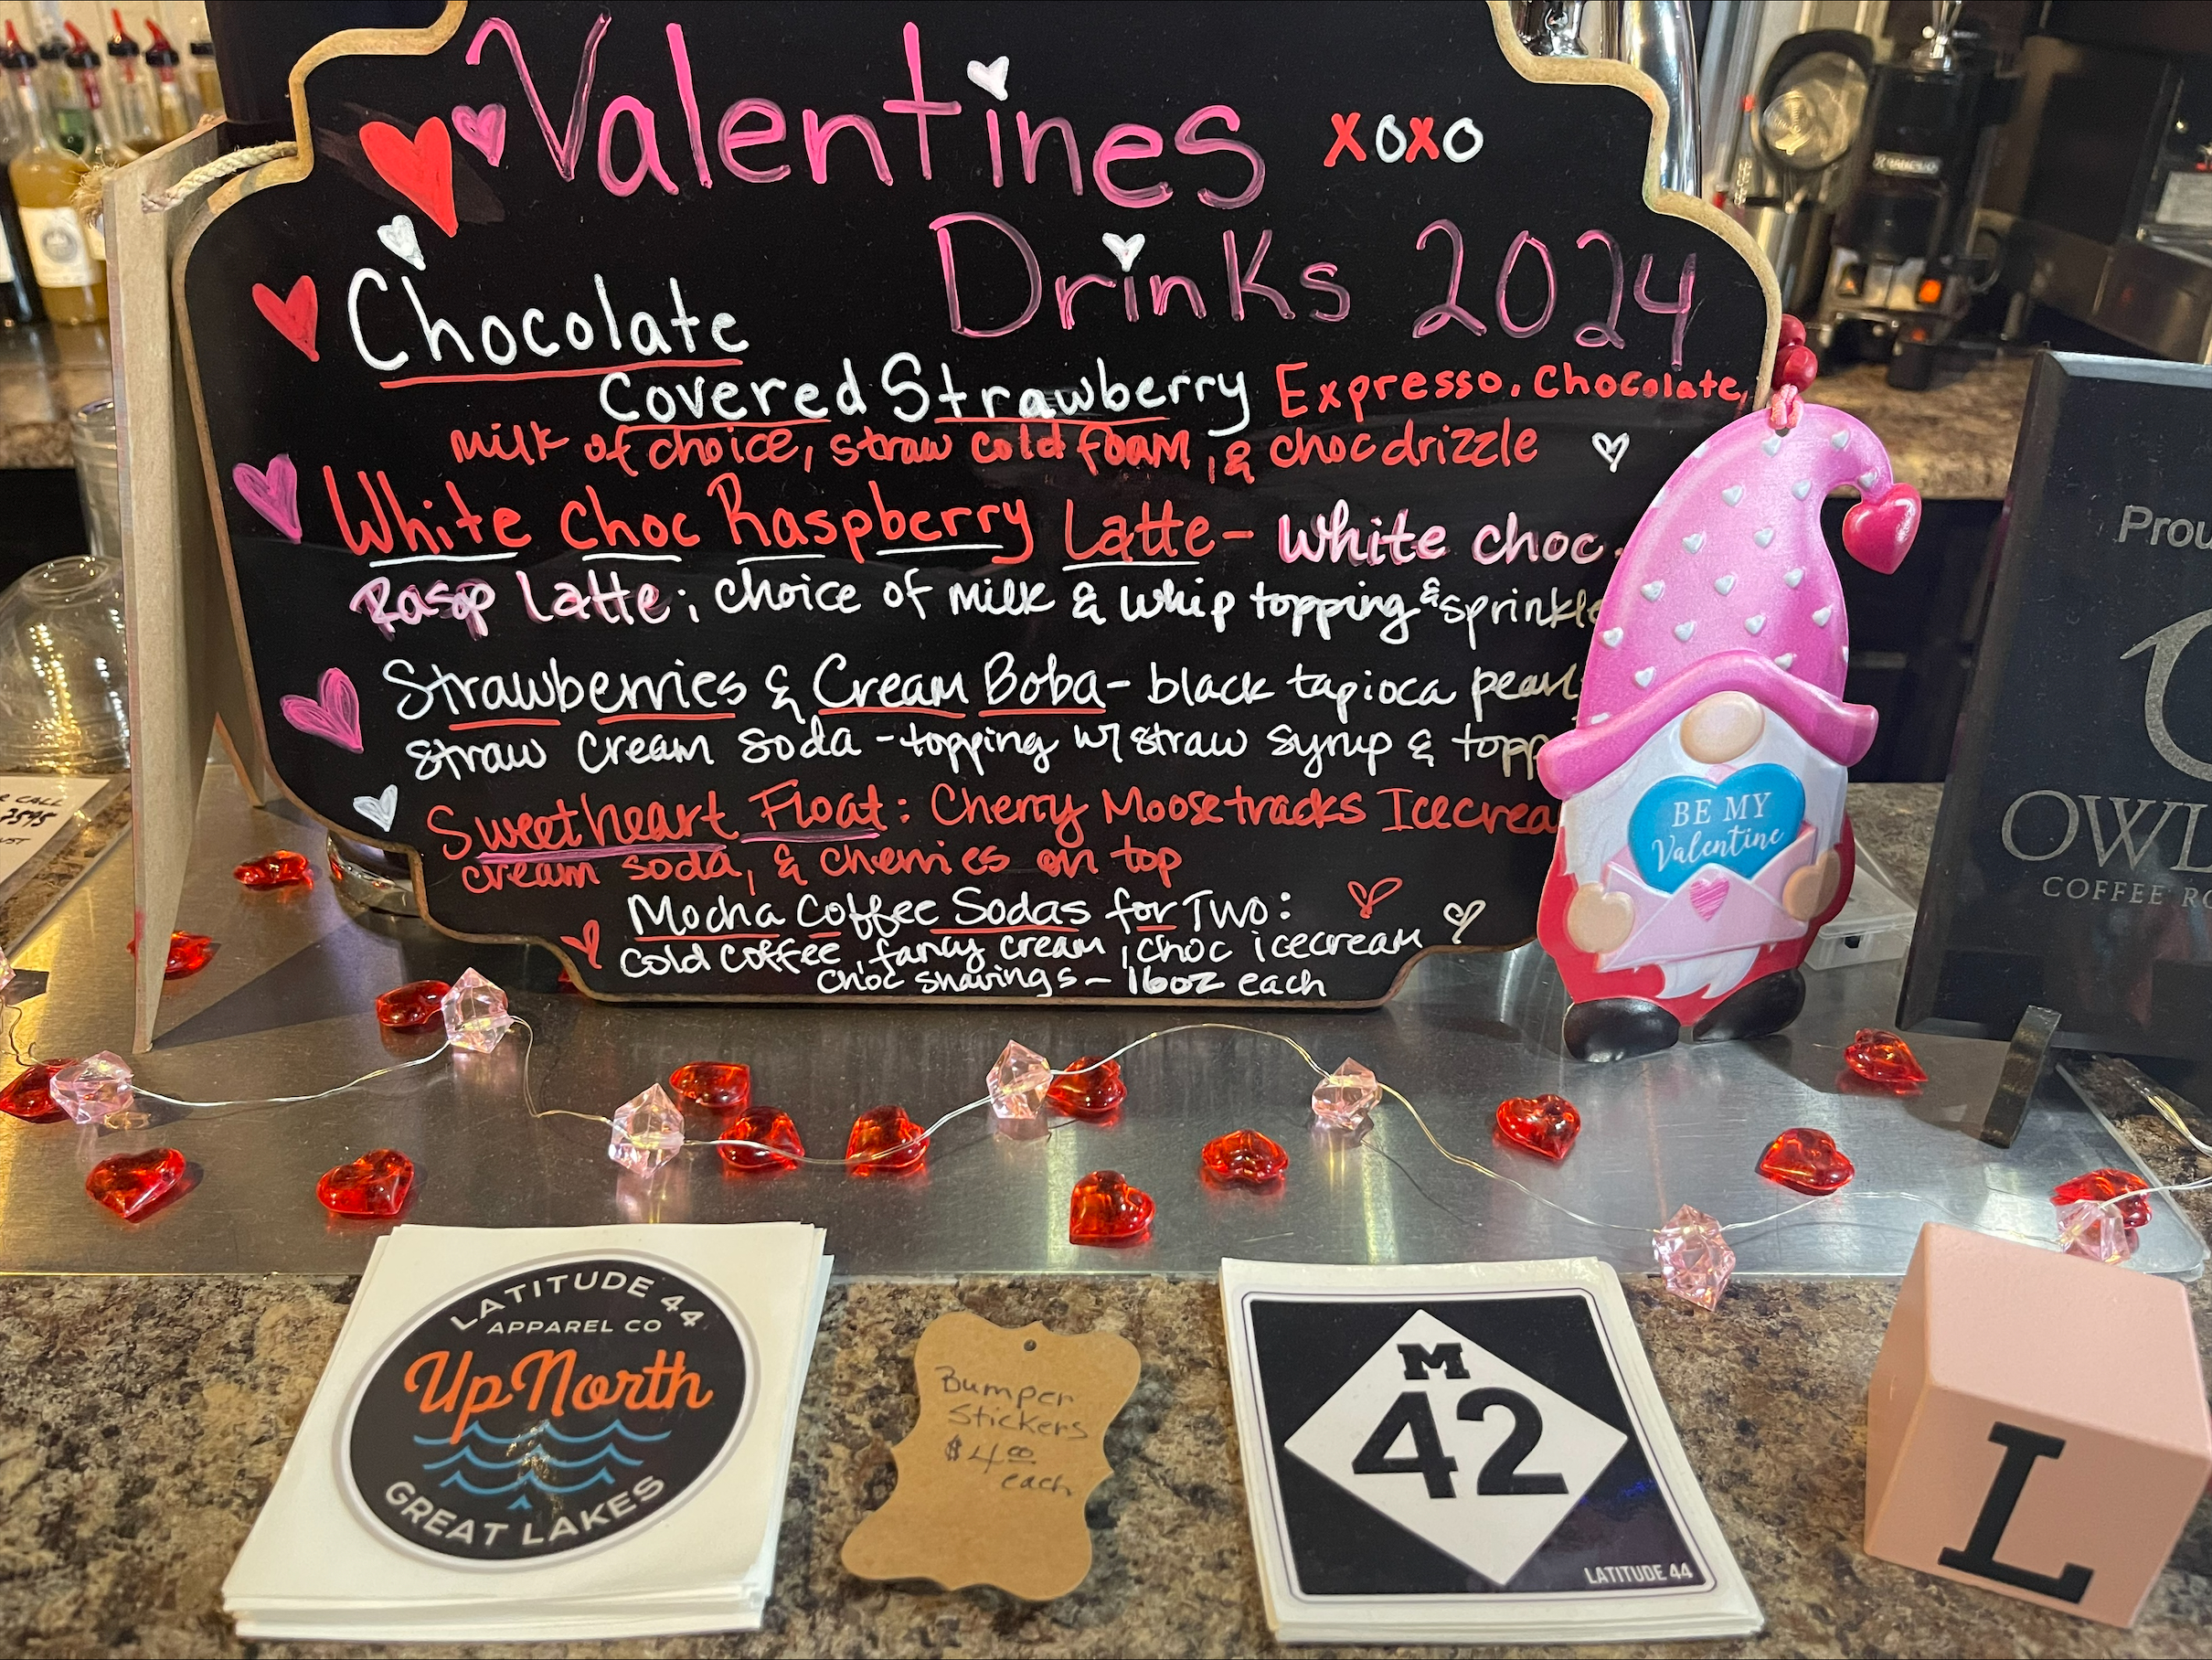 On The Road: Sweetheart ice cream floats and more at Latitude 44